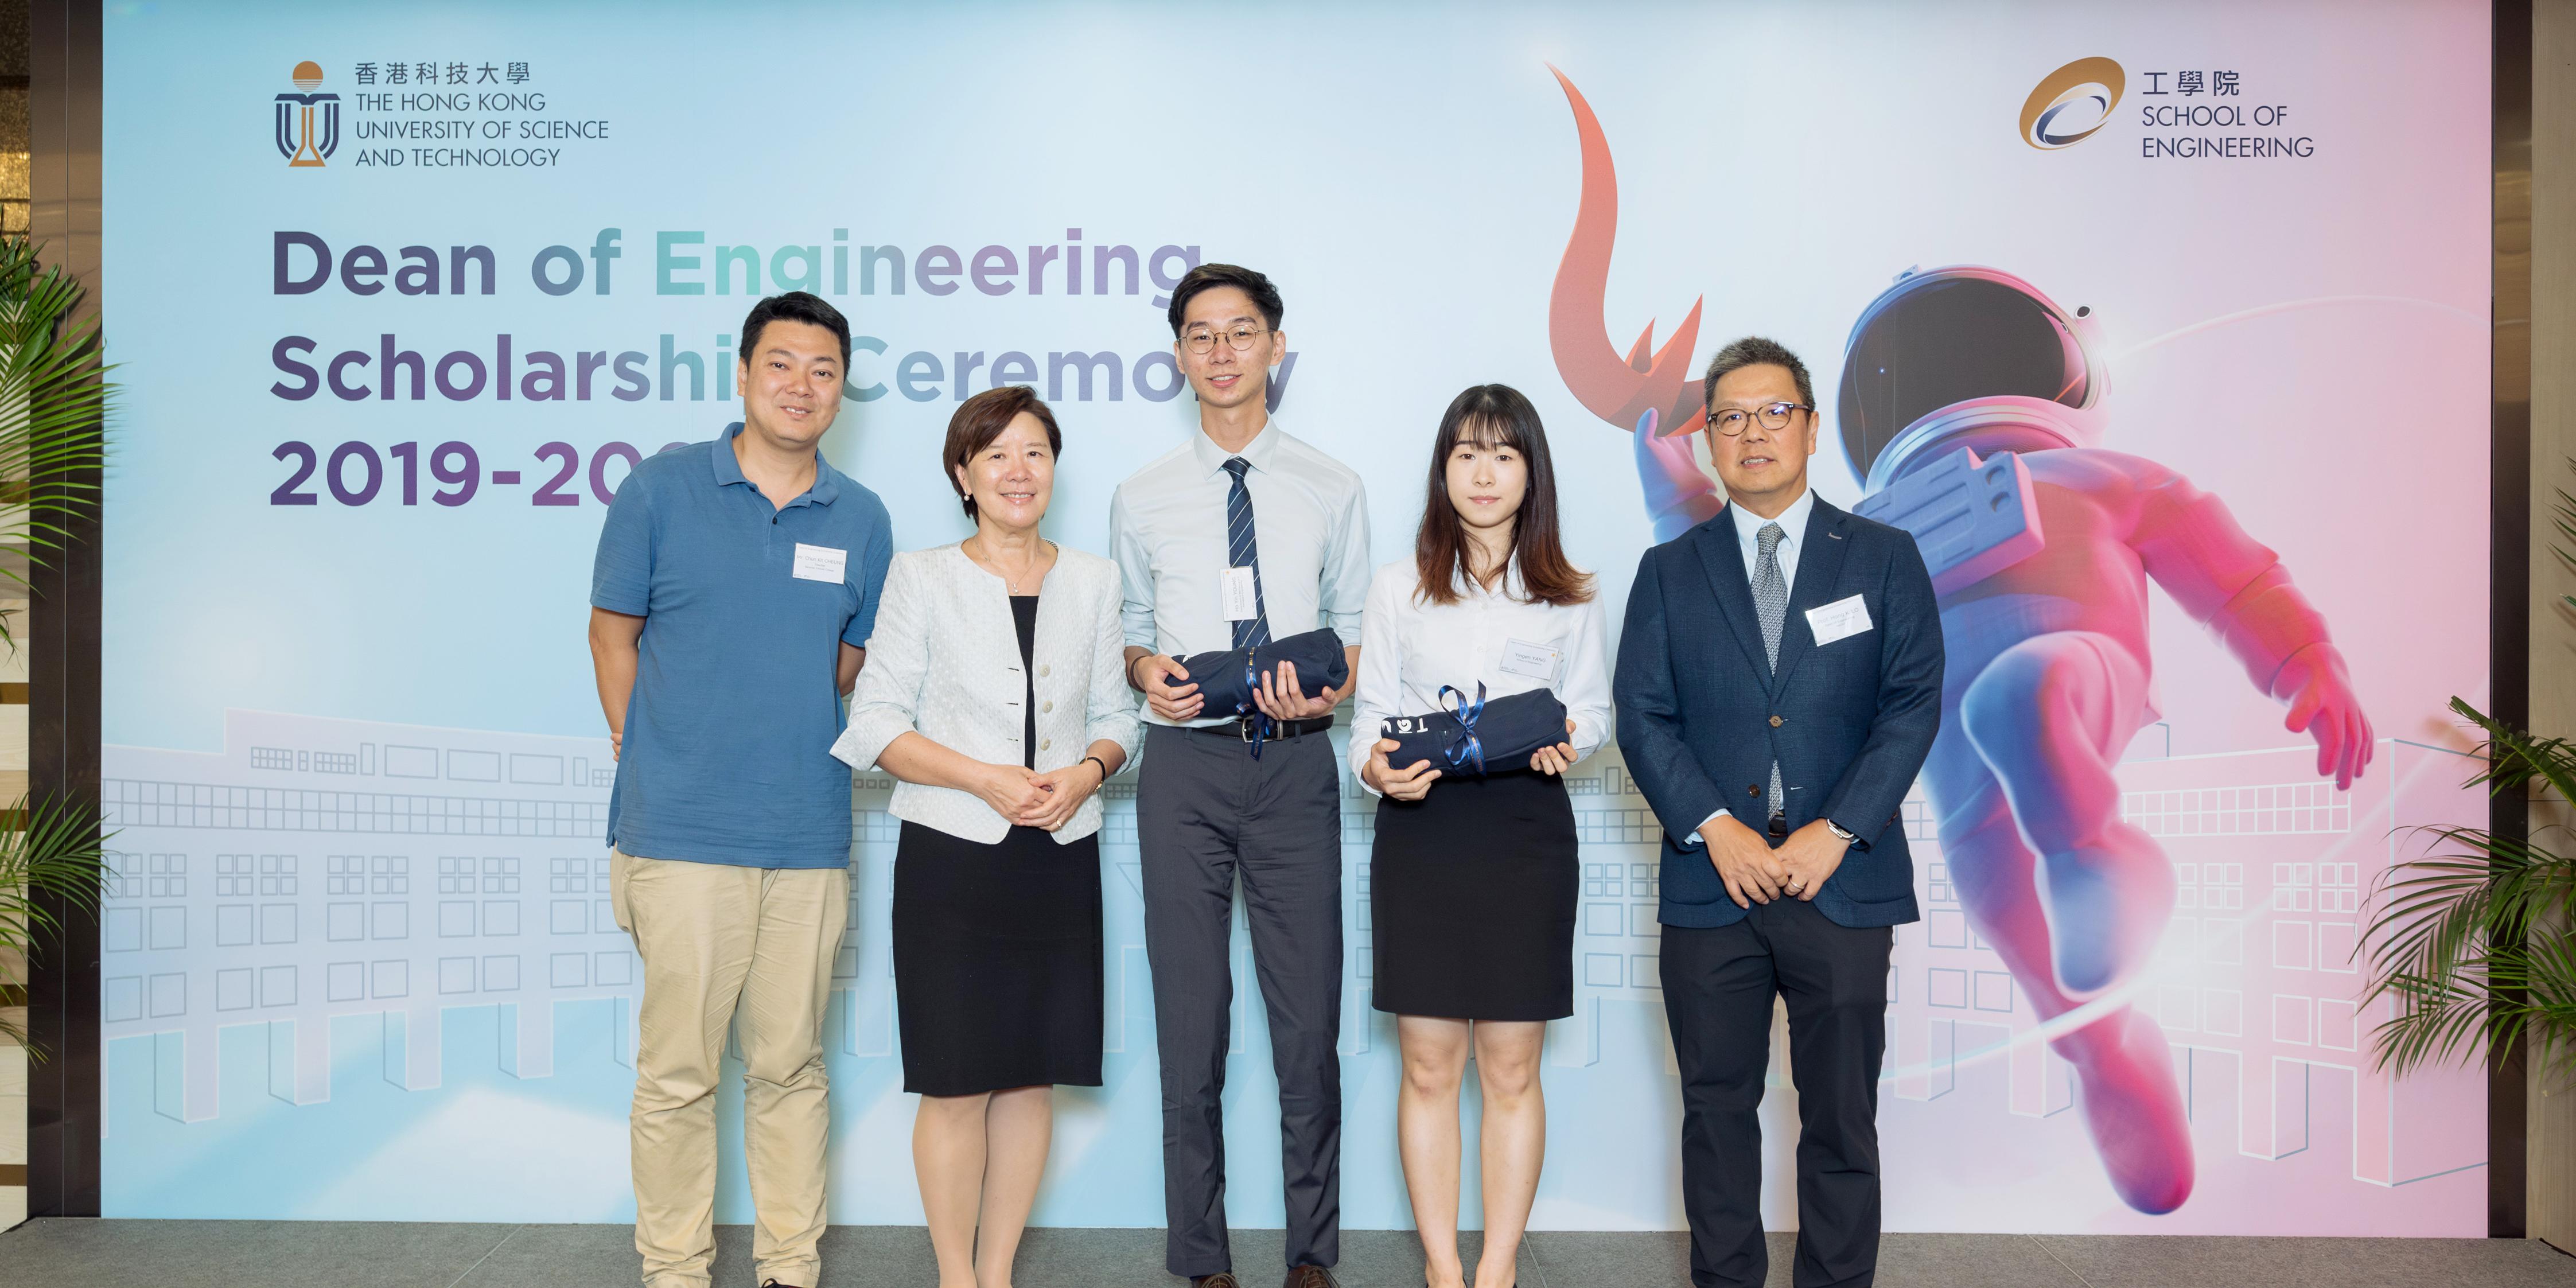 The Dean of Engineering Scholarship Ceremony was successfully held on July 5 at HKUST with 131 attendees.